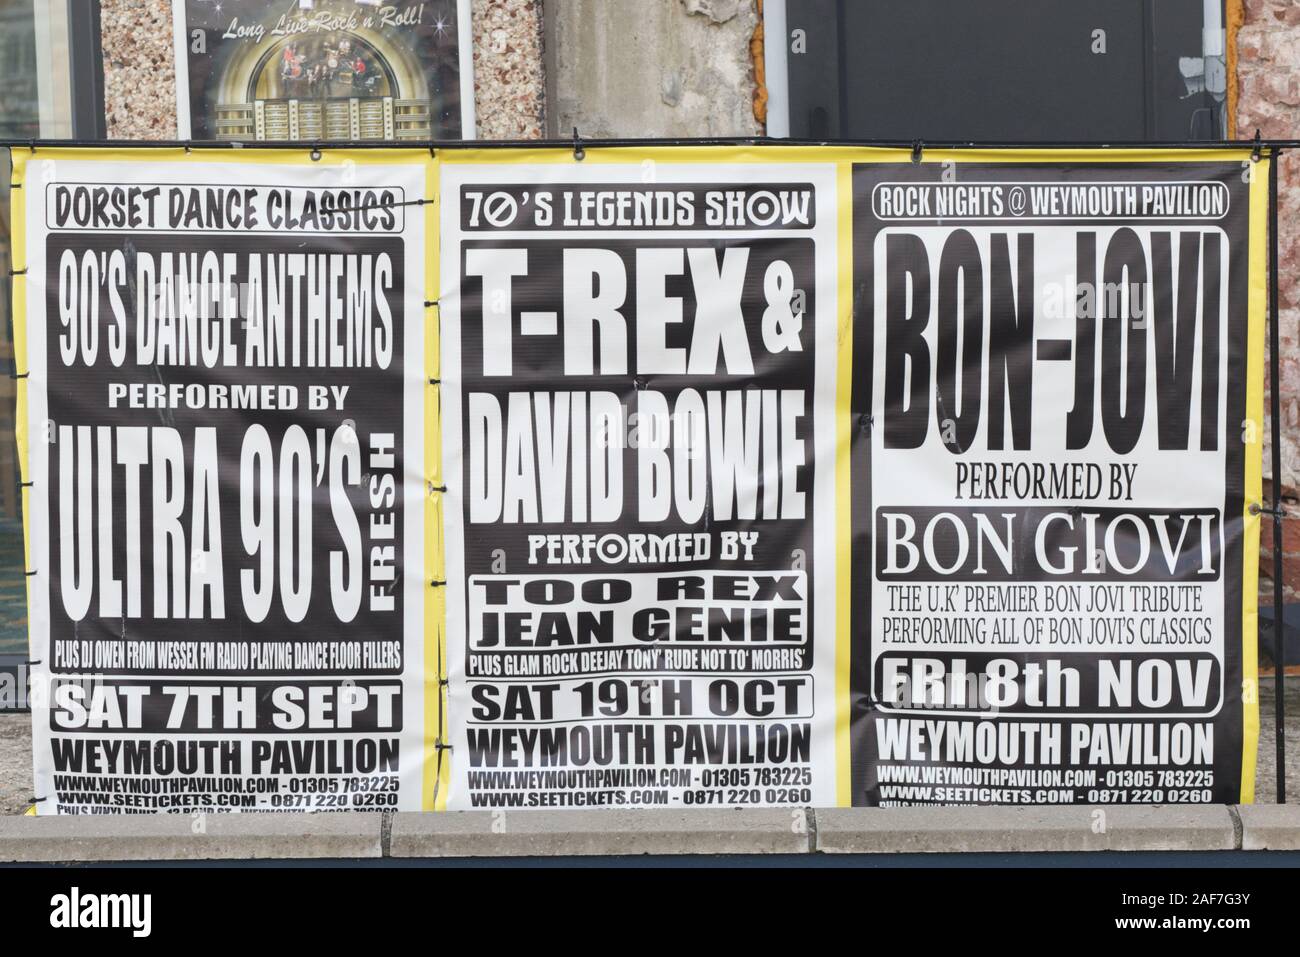 weymouth pavilion posters advertising ultra 90's, T Rex and David Bowie, bon jovi, tribute bands Stock Photo